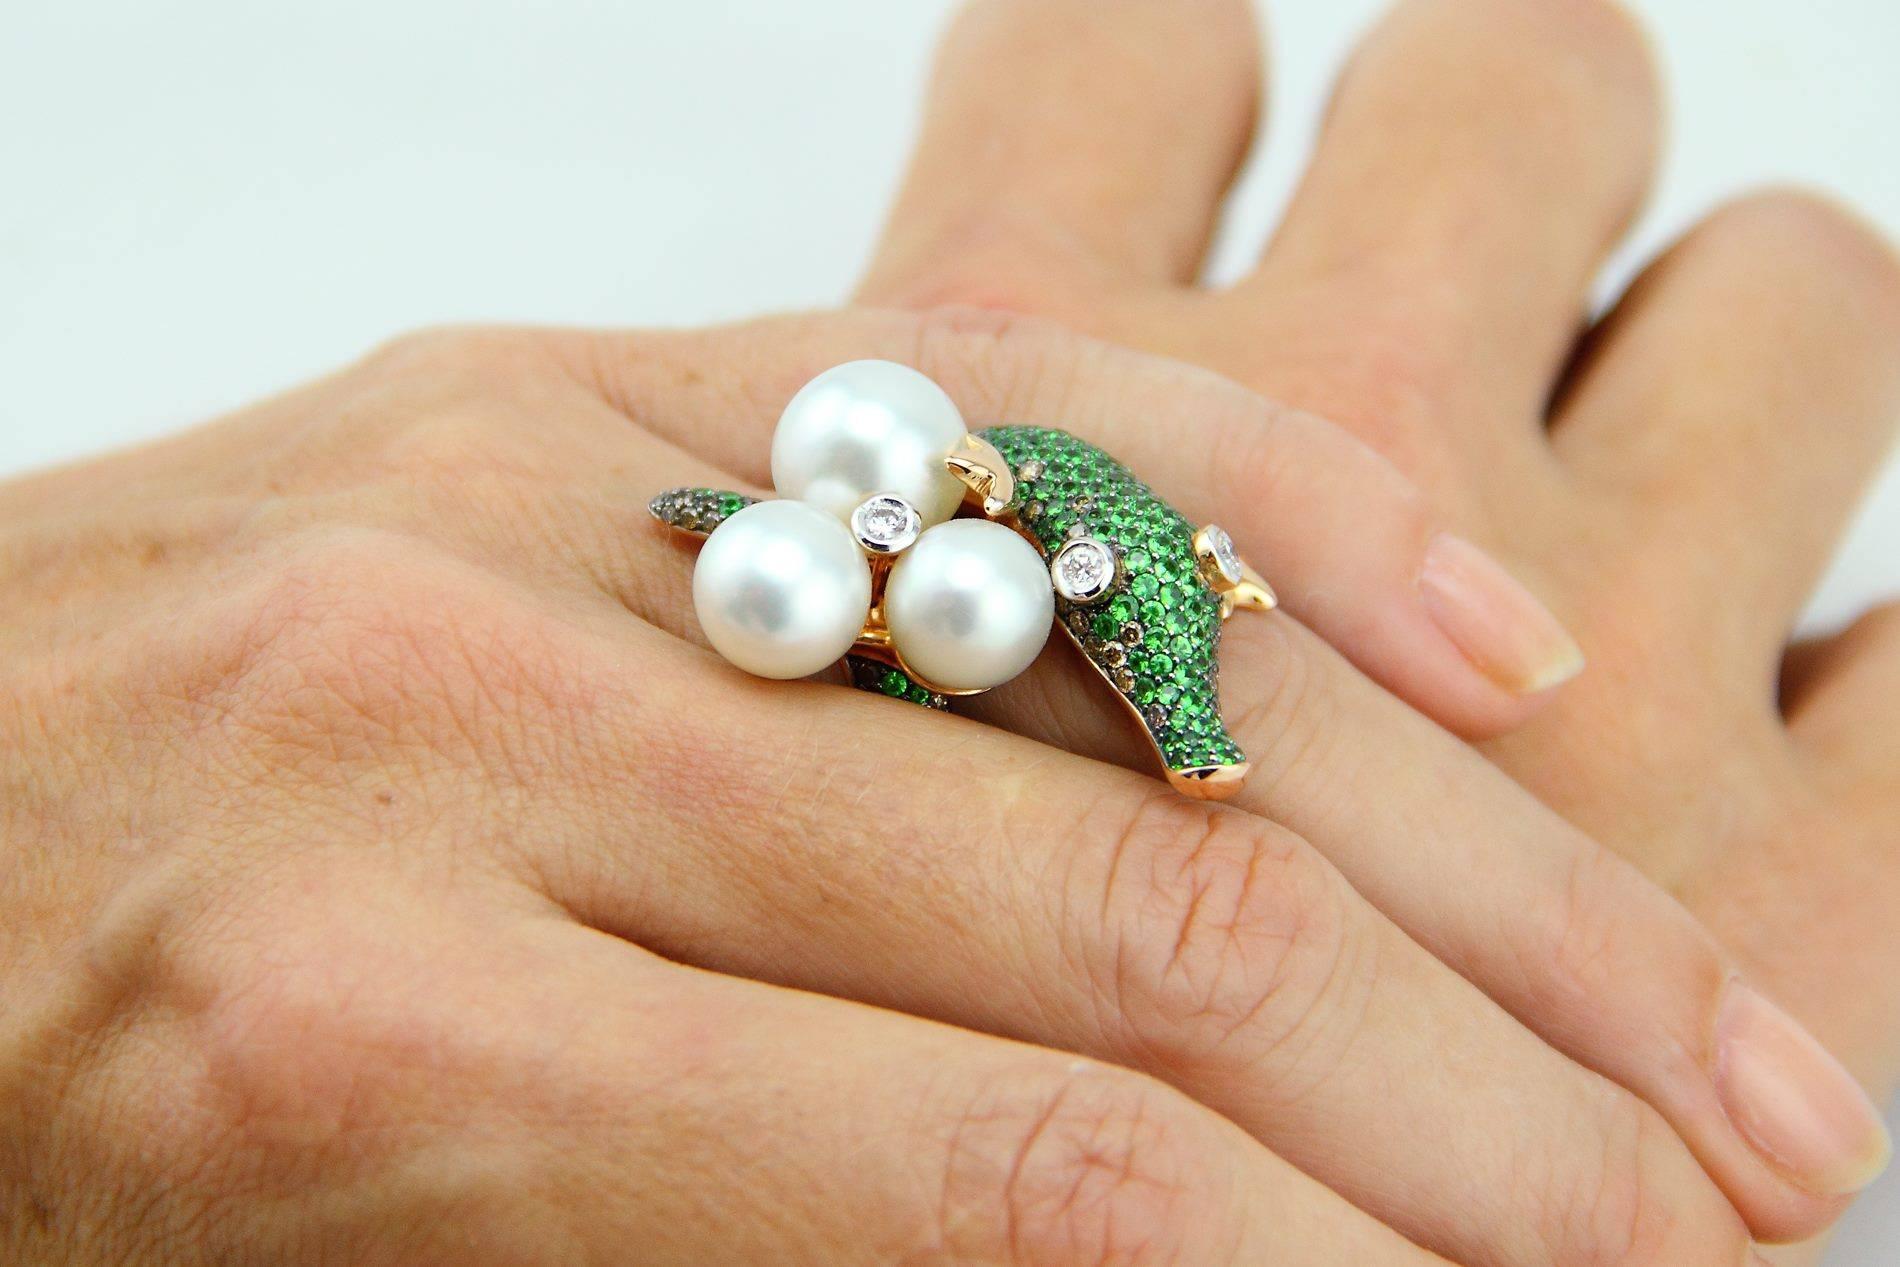 This delightful crocodile cocktail ring is crafted using beautiful unblemished Australian South Sea Pearls, set with carefully selected clean cut green tsavorites, brown and white diamonds.  Top quality manufacturing, set in rose gold 18K.  The